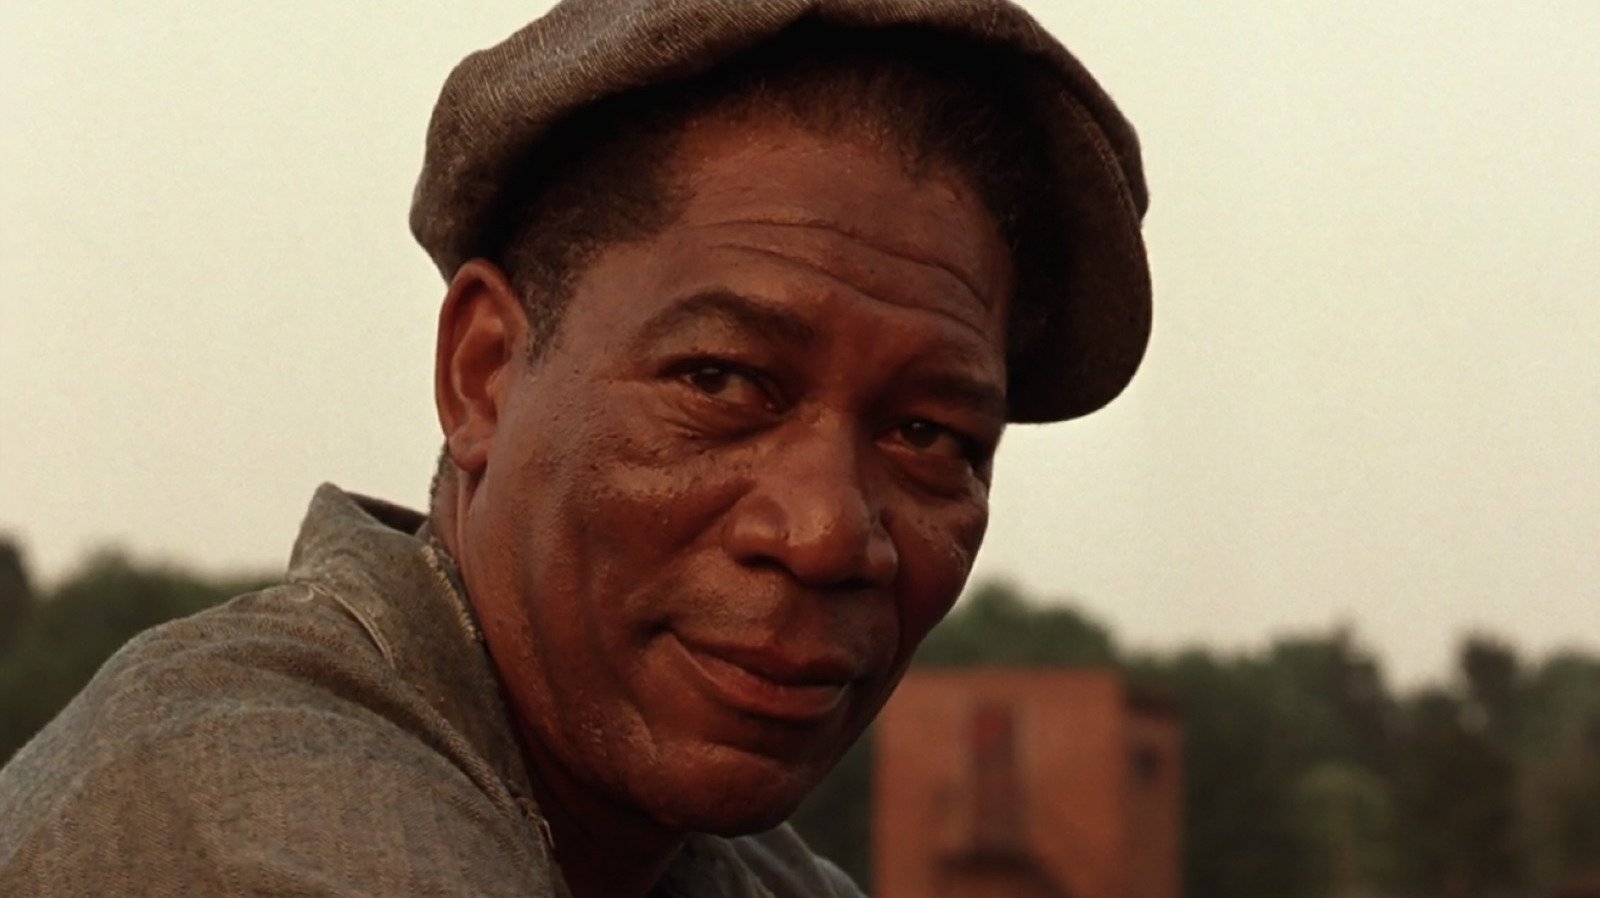 What The Cast Of The Shawshank Redemption Should Look Like - Looper